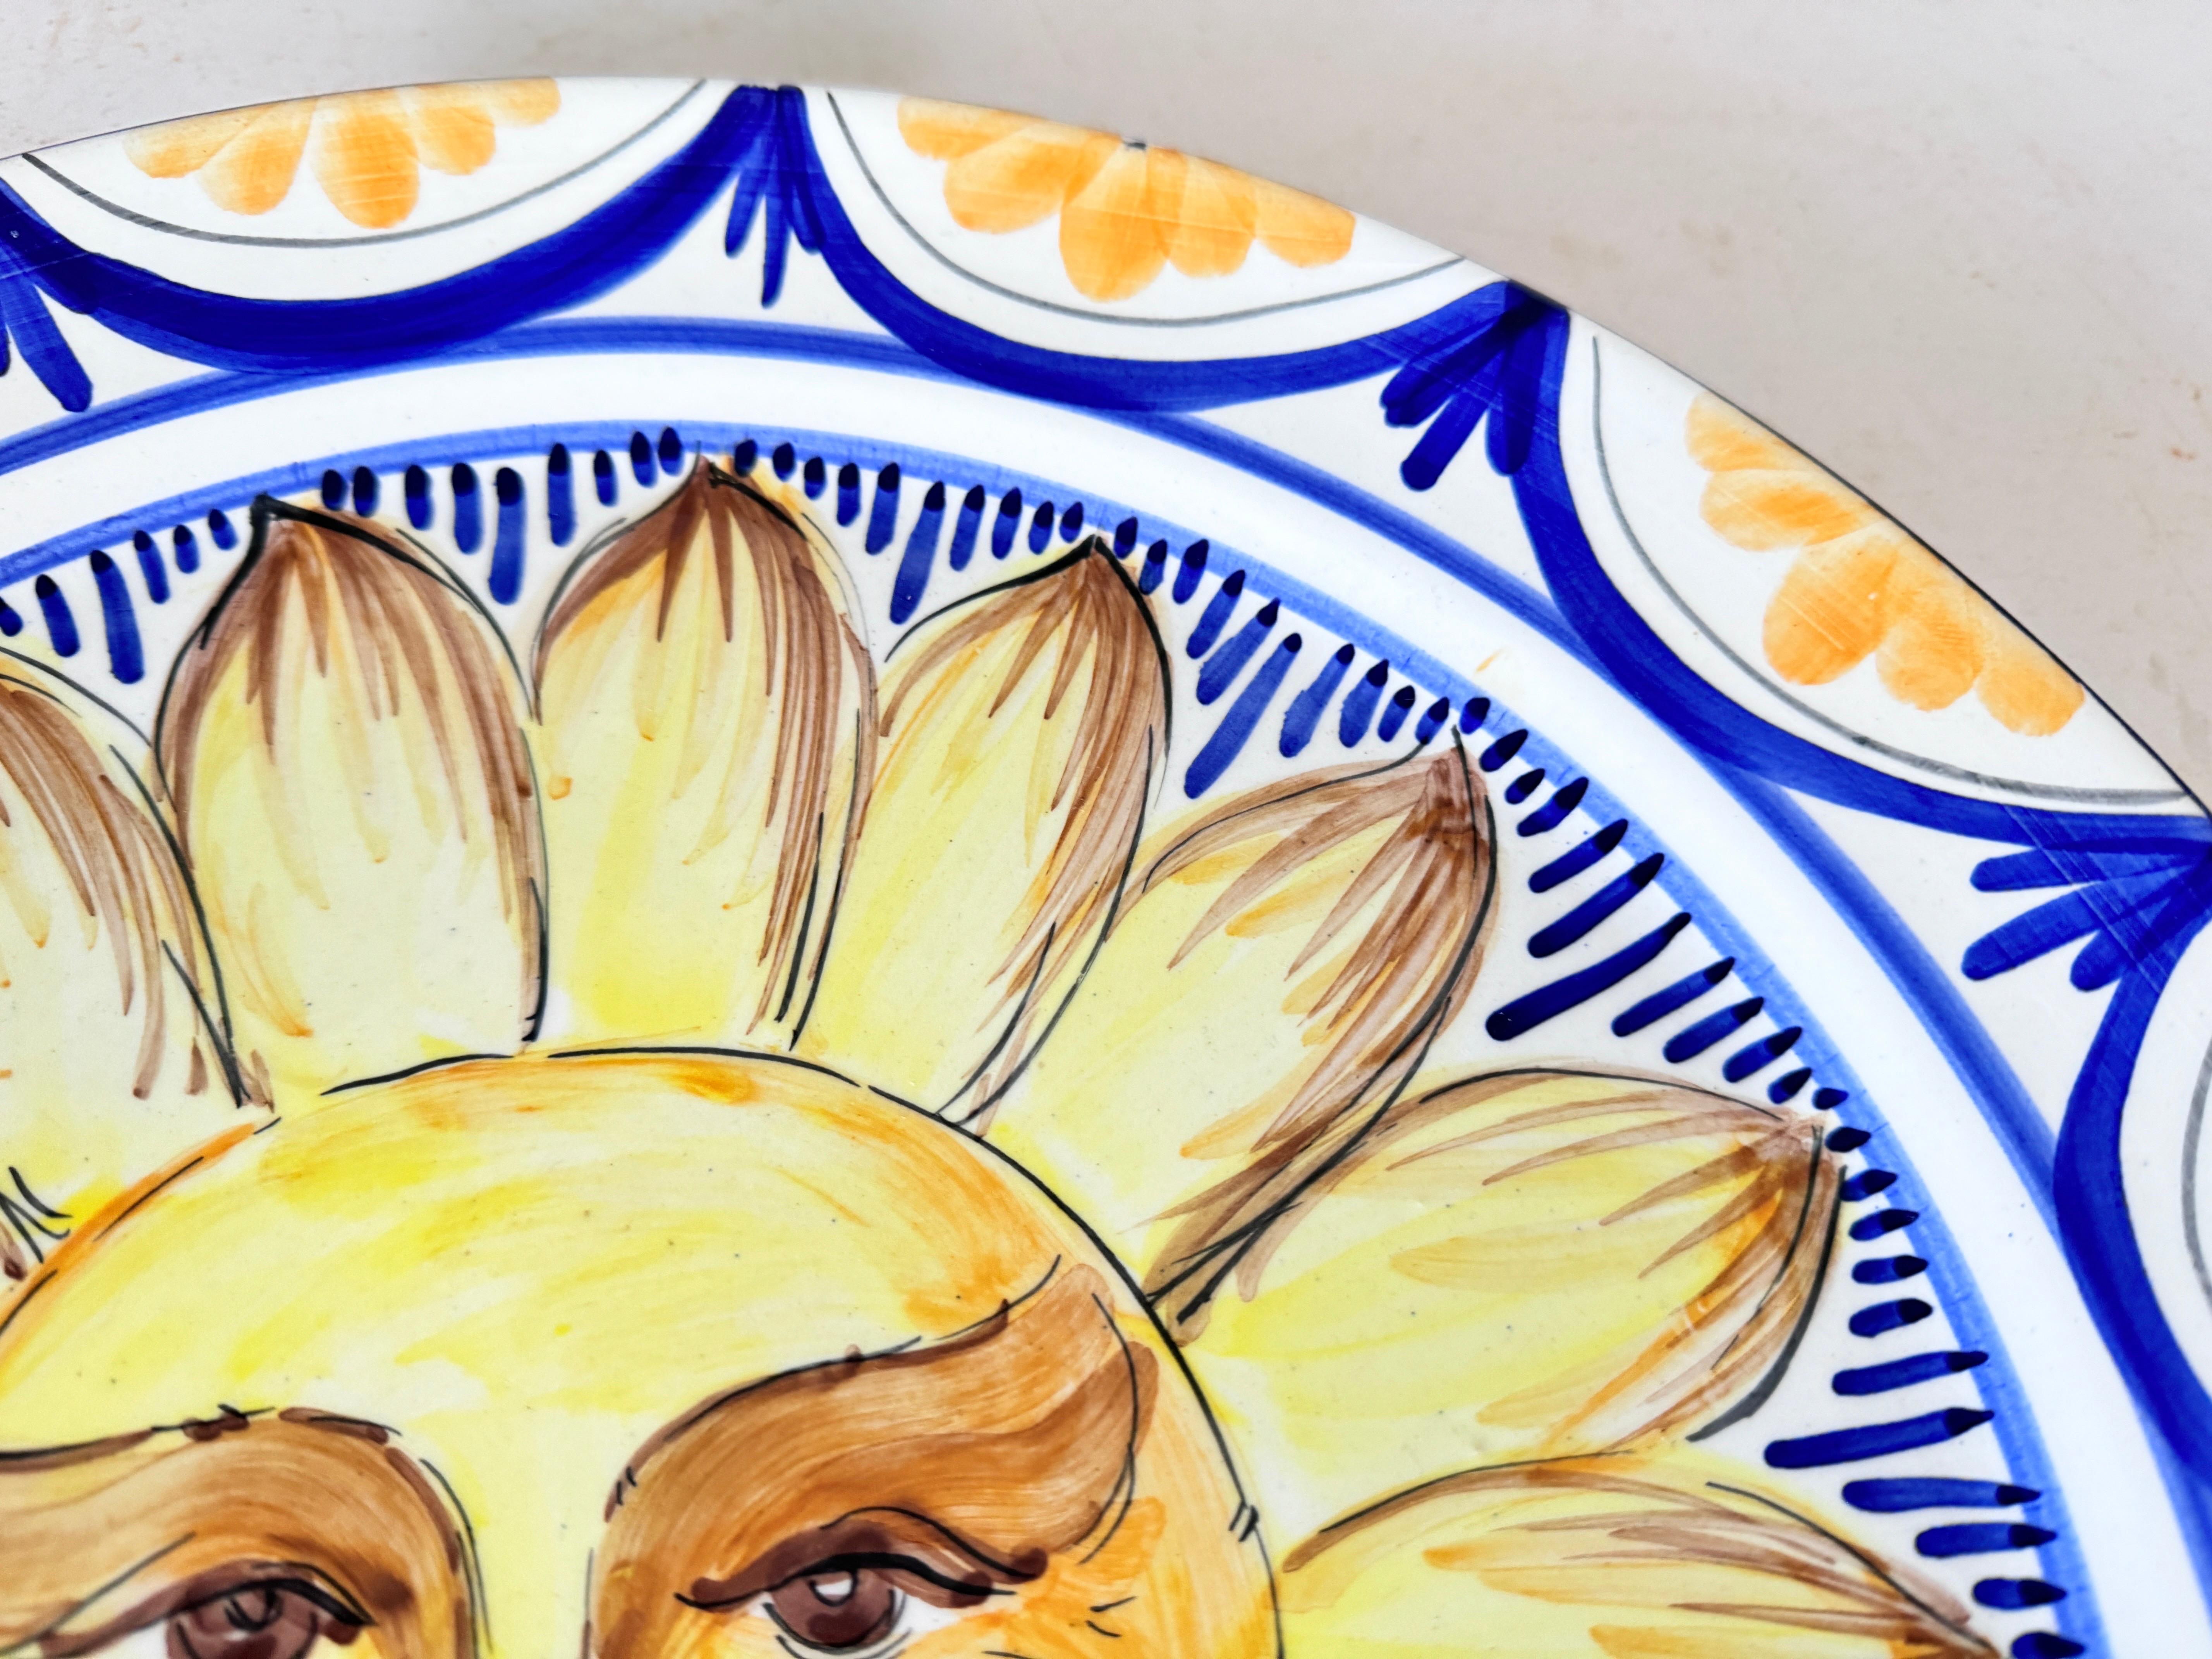 Ceramic Dish Yellow an Blue Italy 20th Century representing the Sun For Sale 1